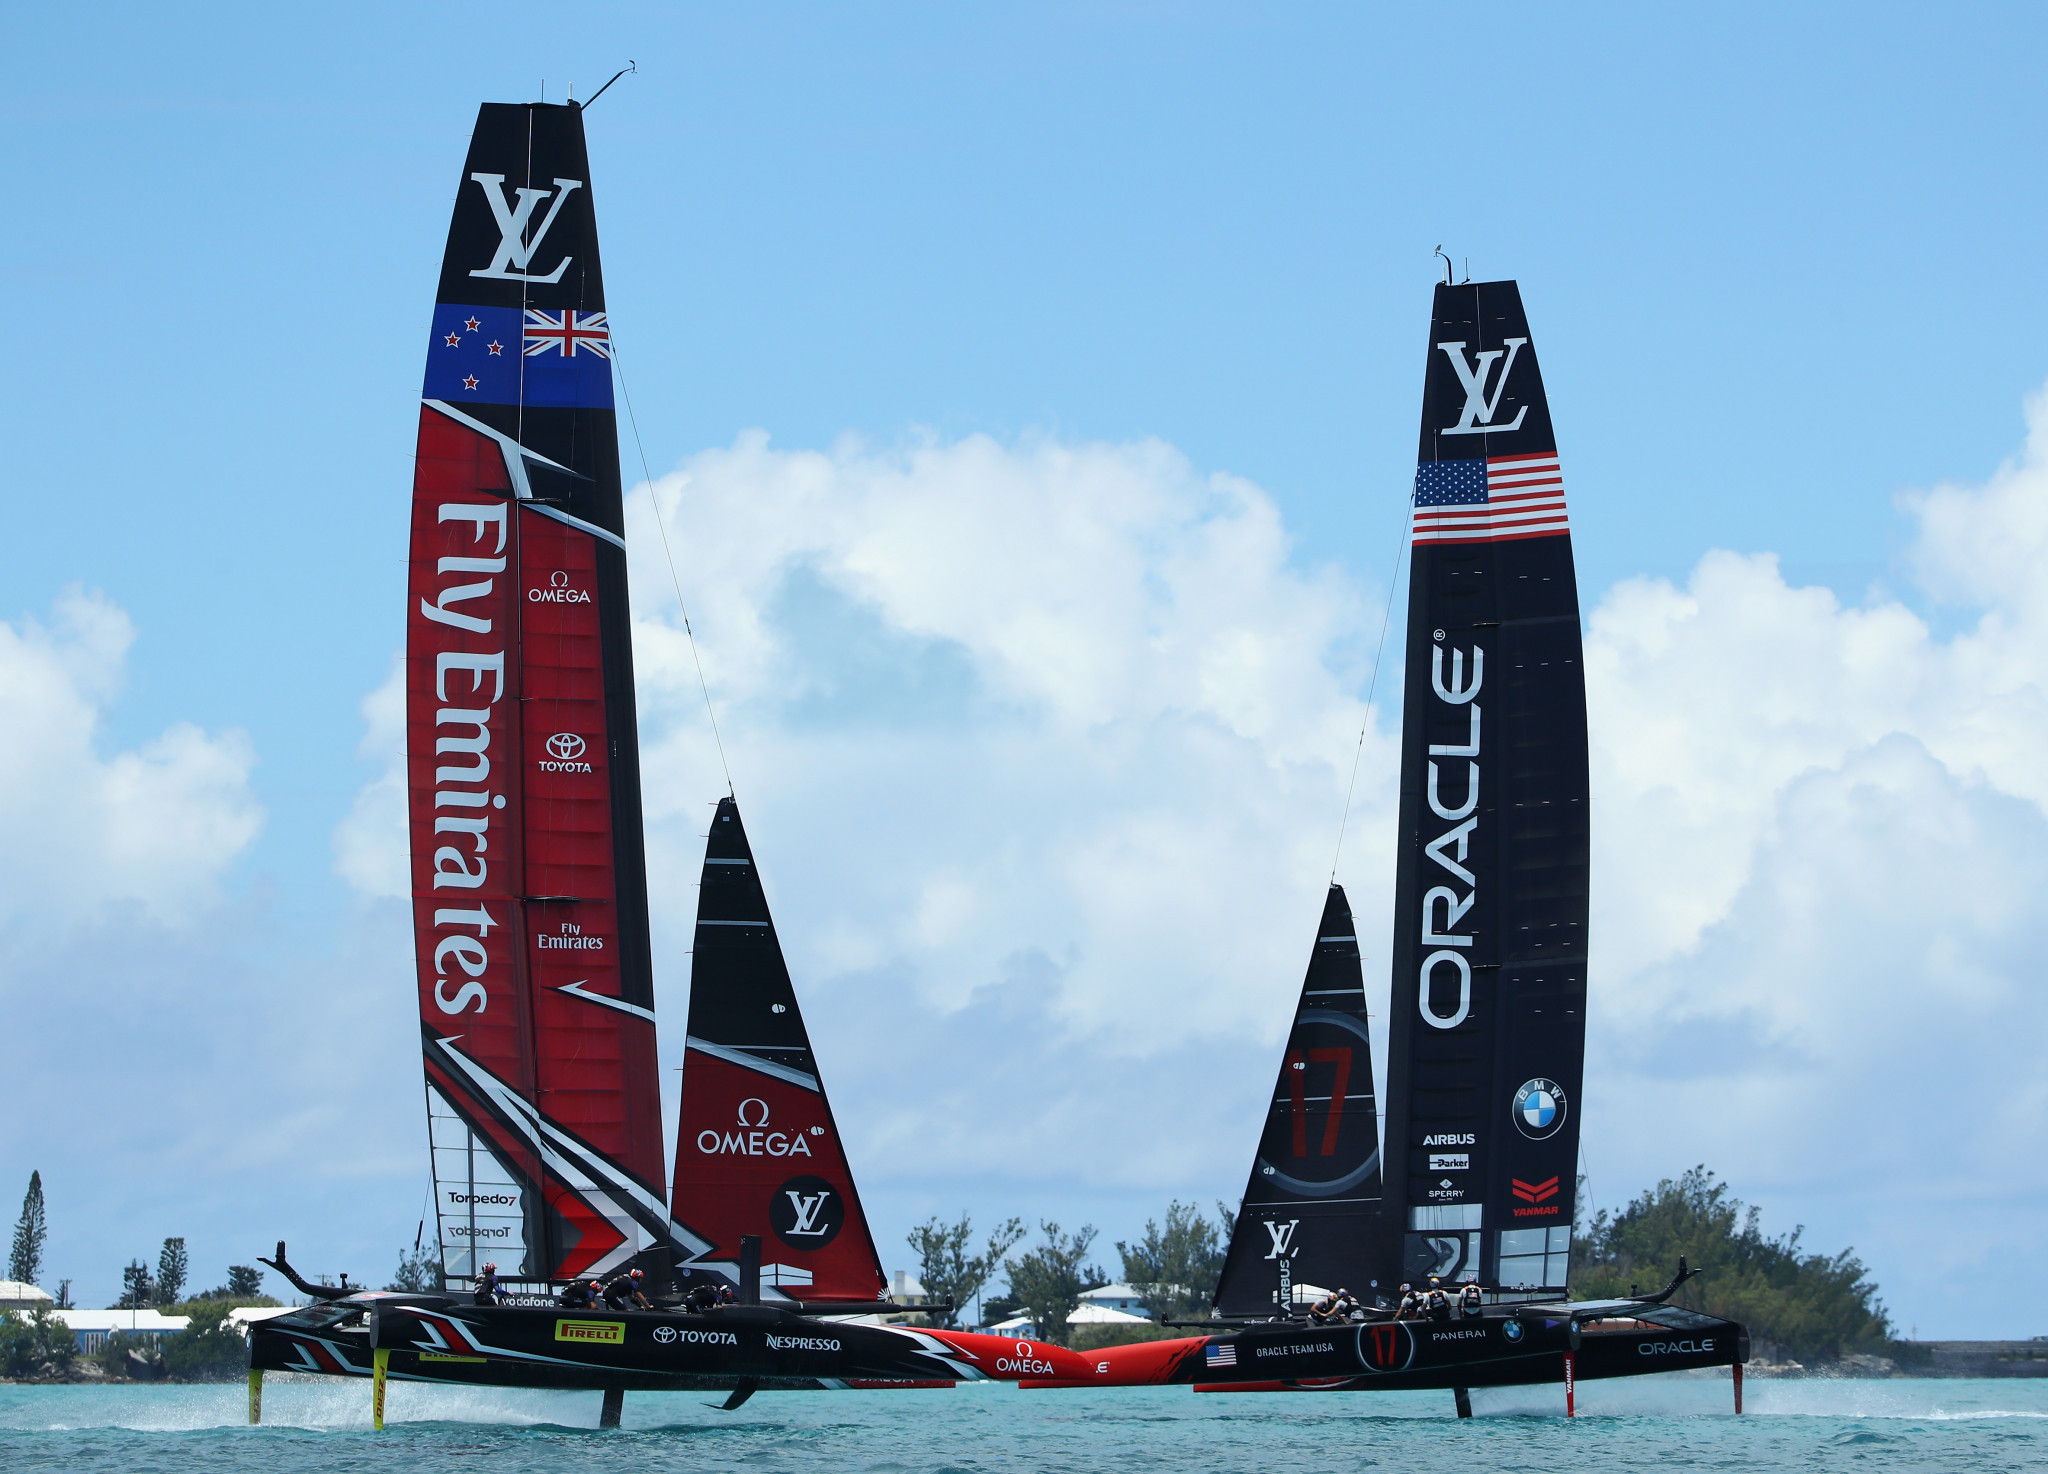 The 2021 America's Cup is to go ahead as planned next March, despite the coronavirus crisis, according to organisers ©Getty Images